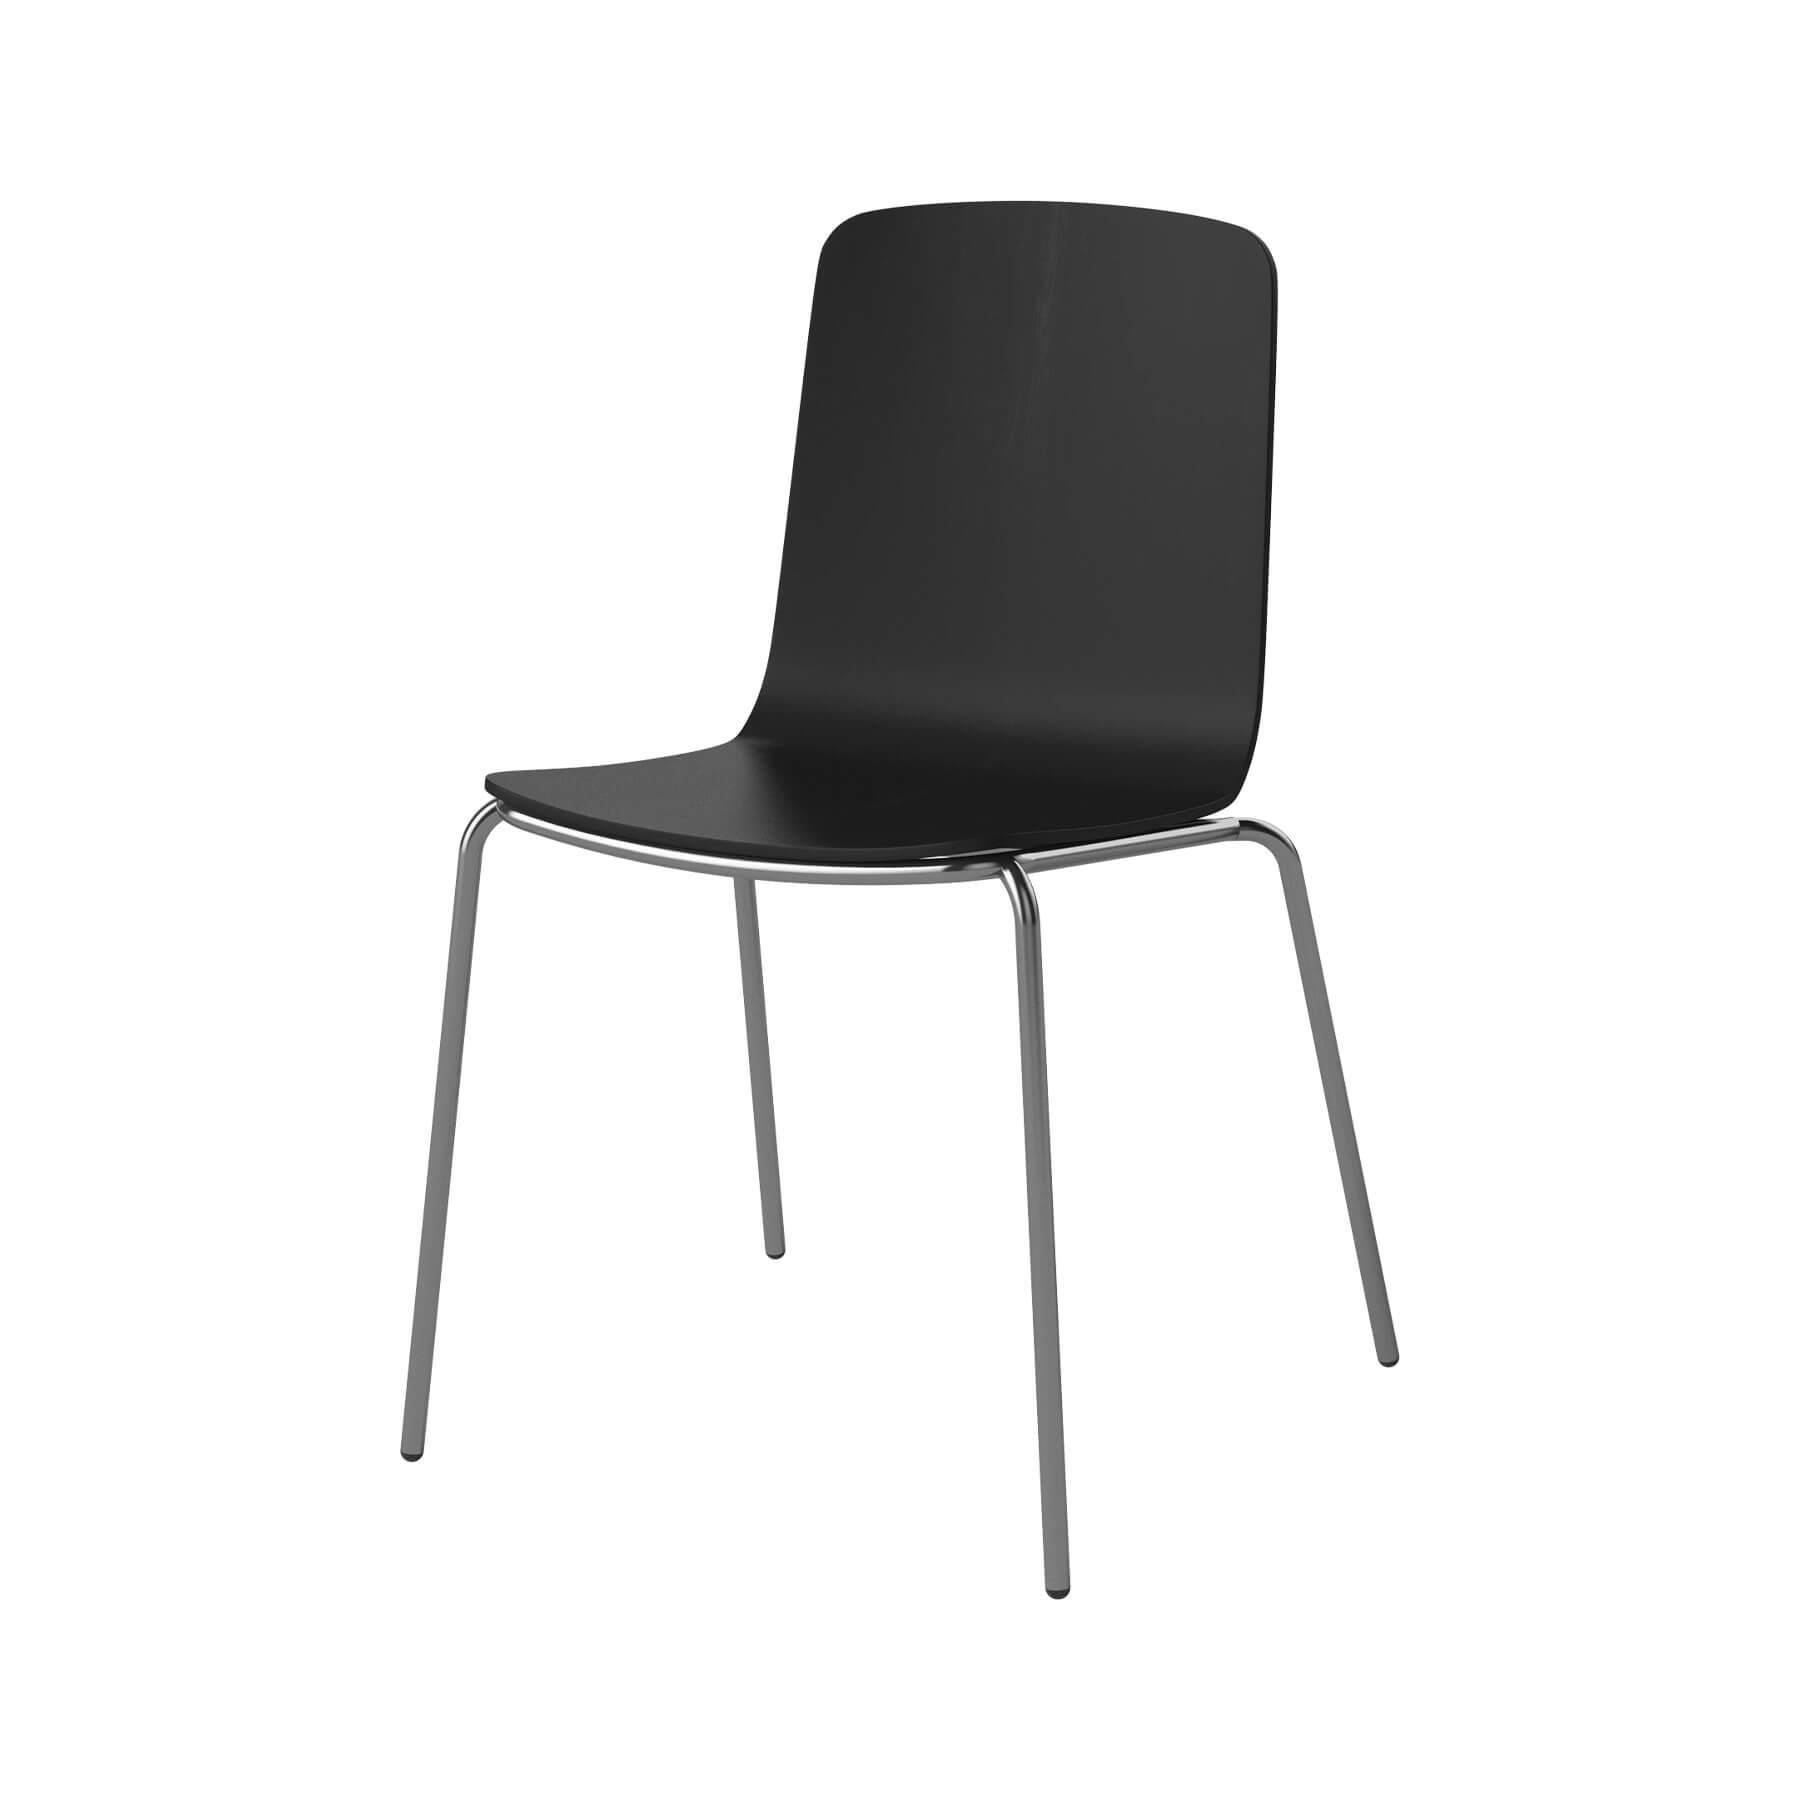 Bolia Palm Dining Chair Metal Legs Black Laquered Oak Chrome Plated Legs Designer Furniture From Holloways Of Ludlow